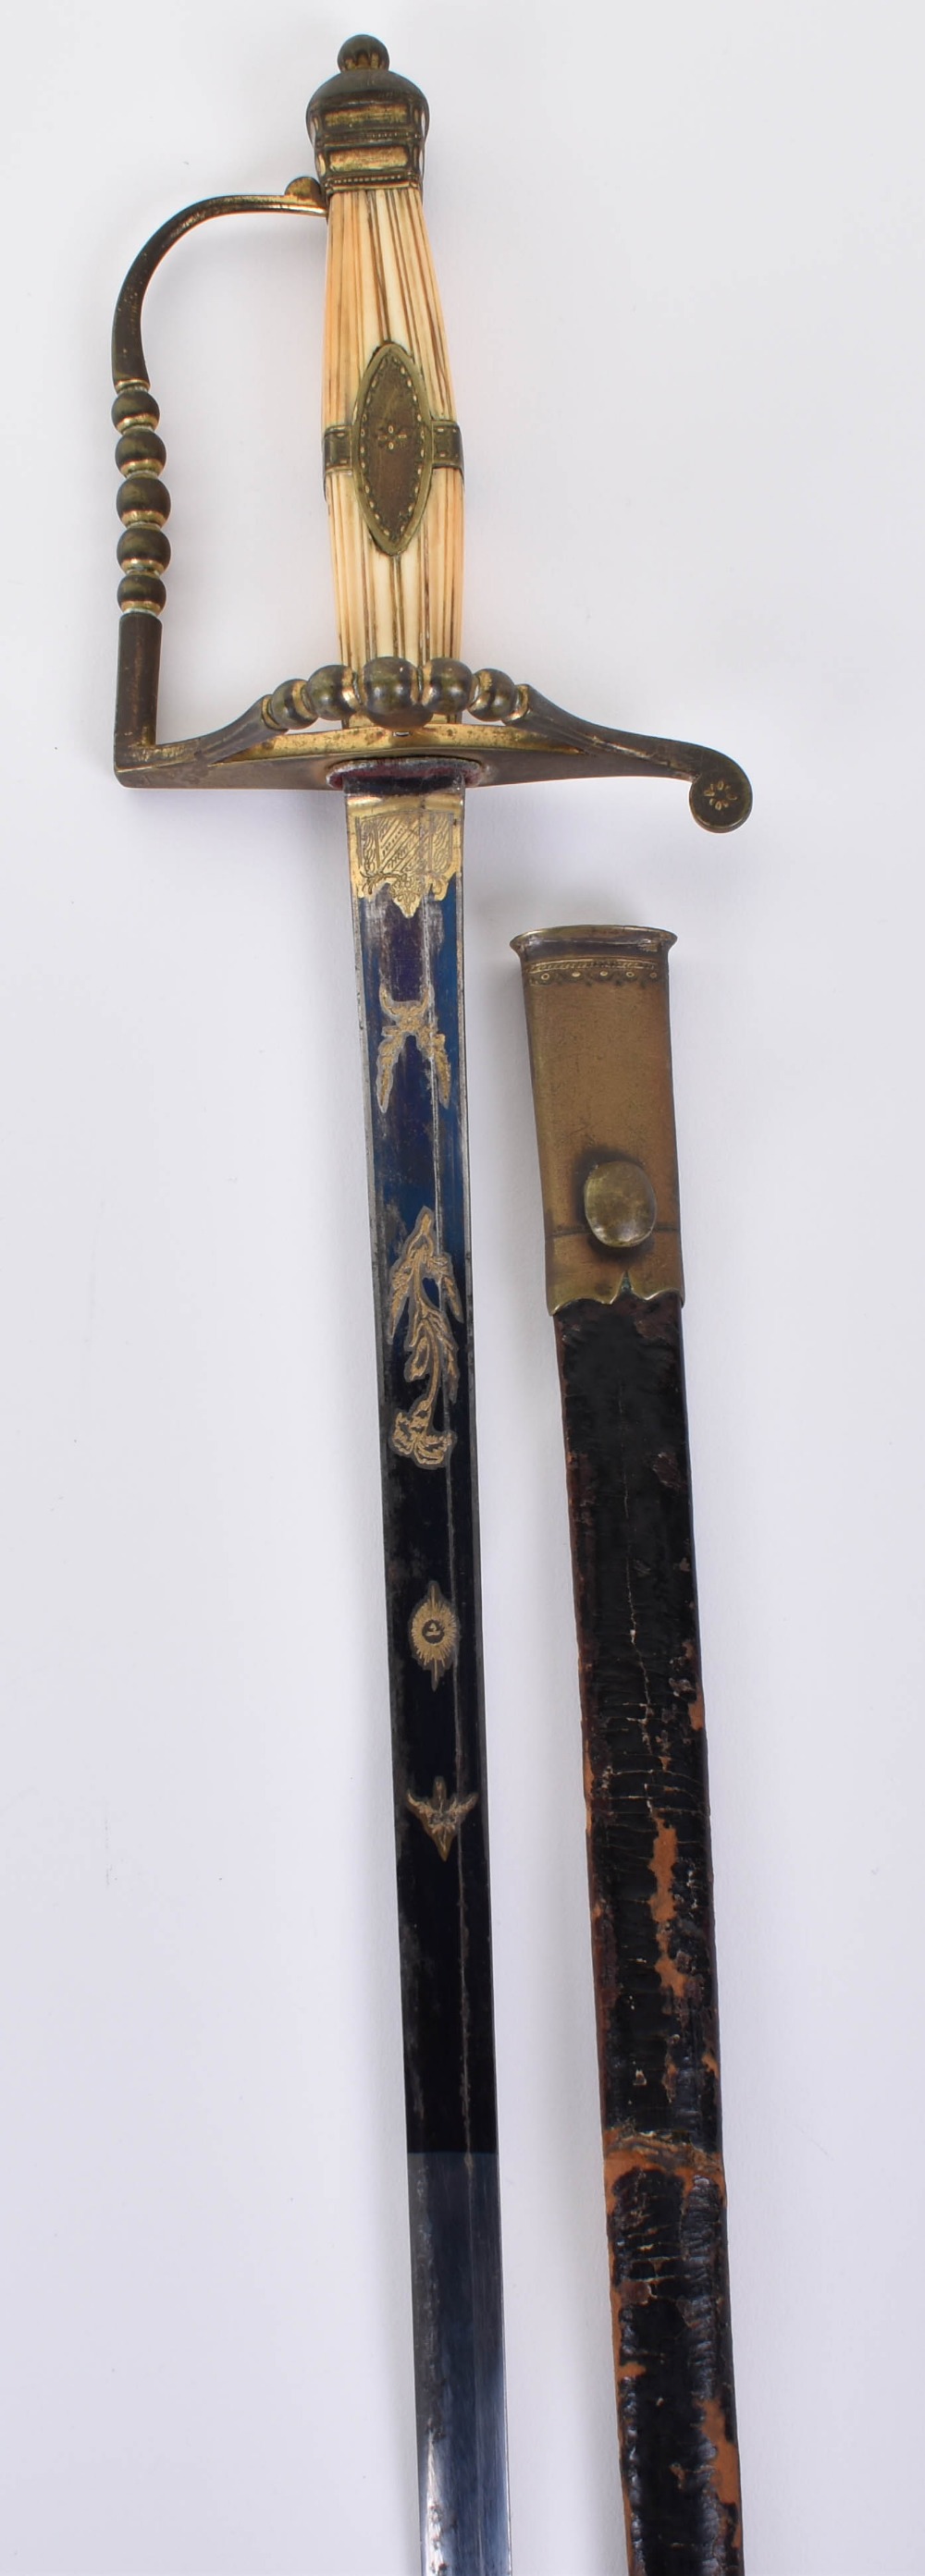 ^ Rare French officer’s sword spadroon in the English manner (à monture à l’anglais) c.1800 probably